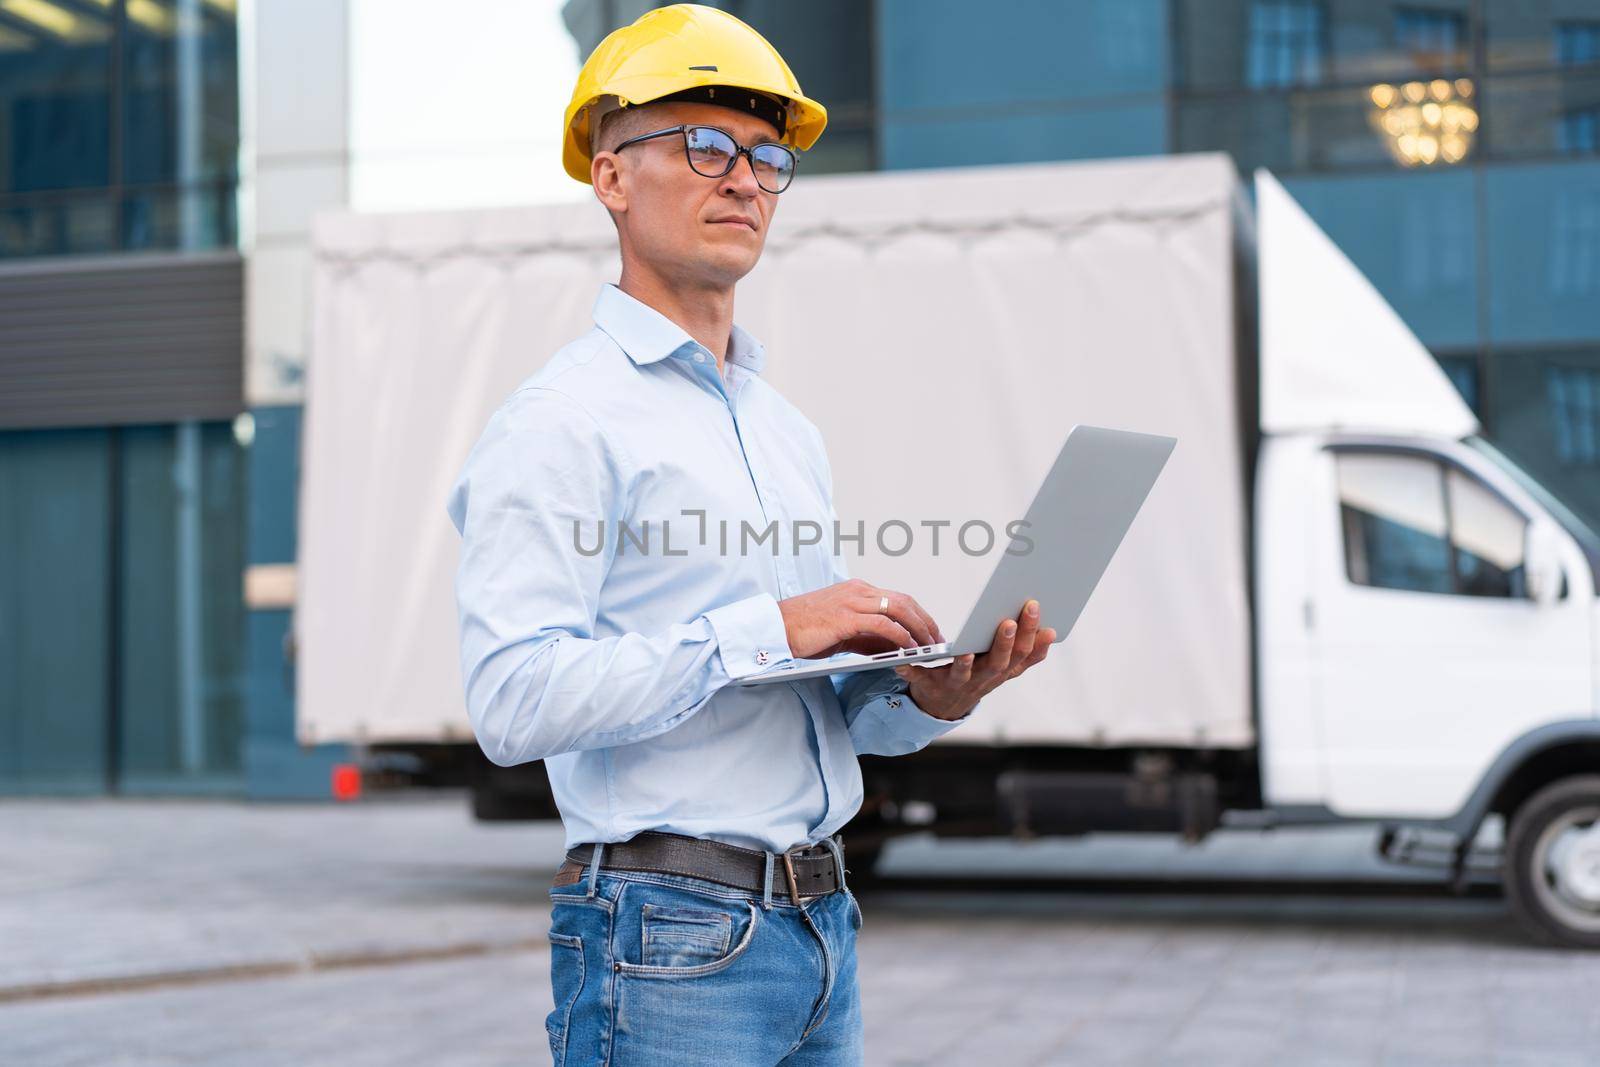 Business. Engineer Worker Protective Helmet Use Laptop Controls Working Process Inspector Supervisor Yellow Hard Hat Glasses Transportation Company Office Building And Truck Background